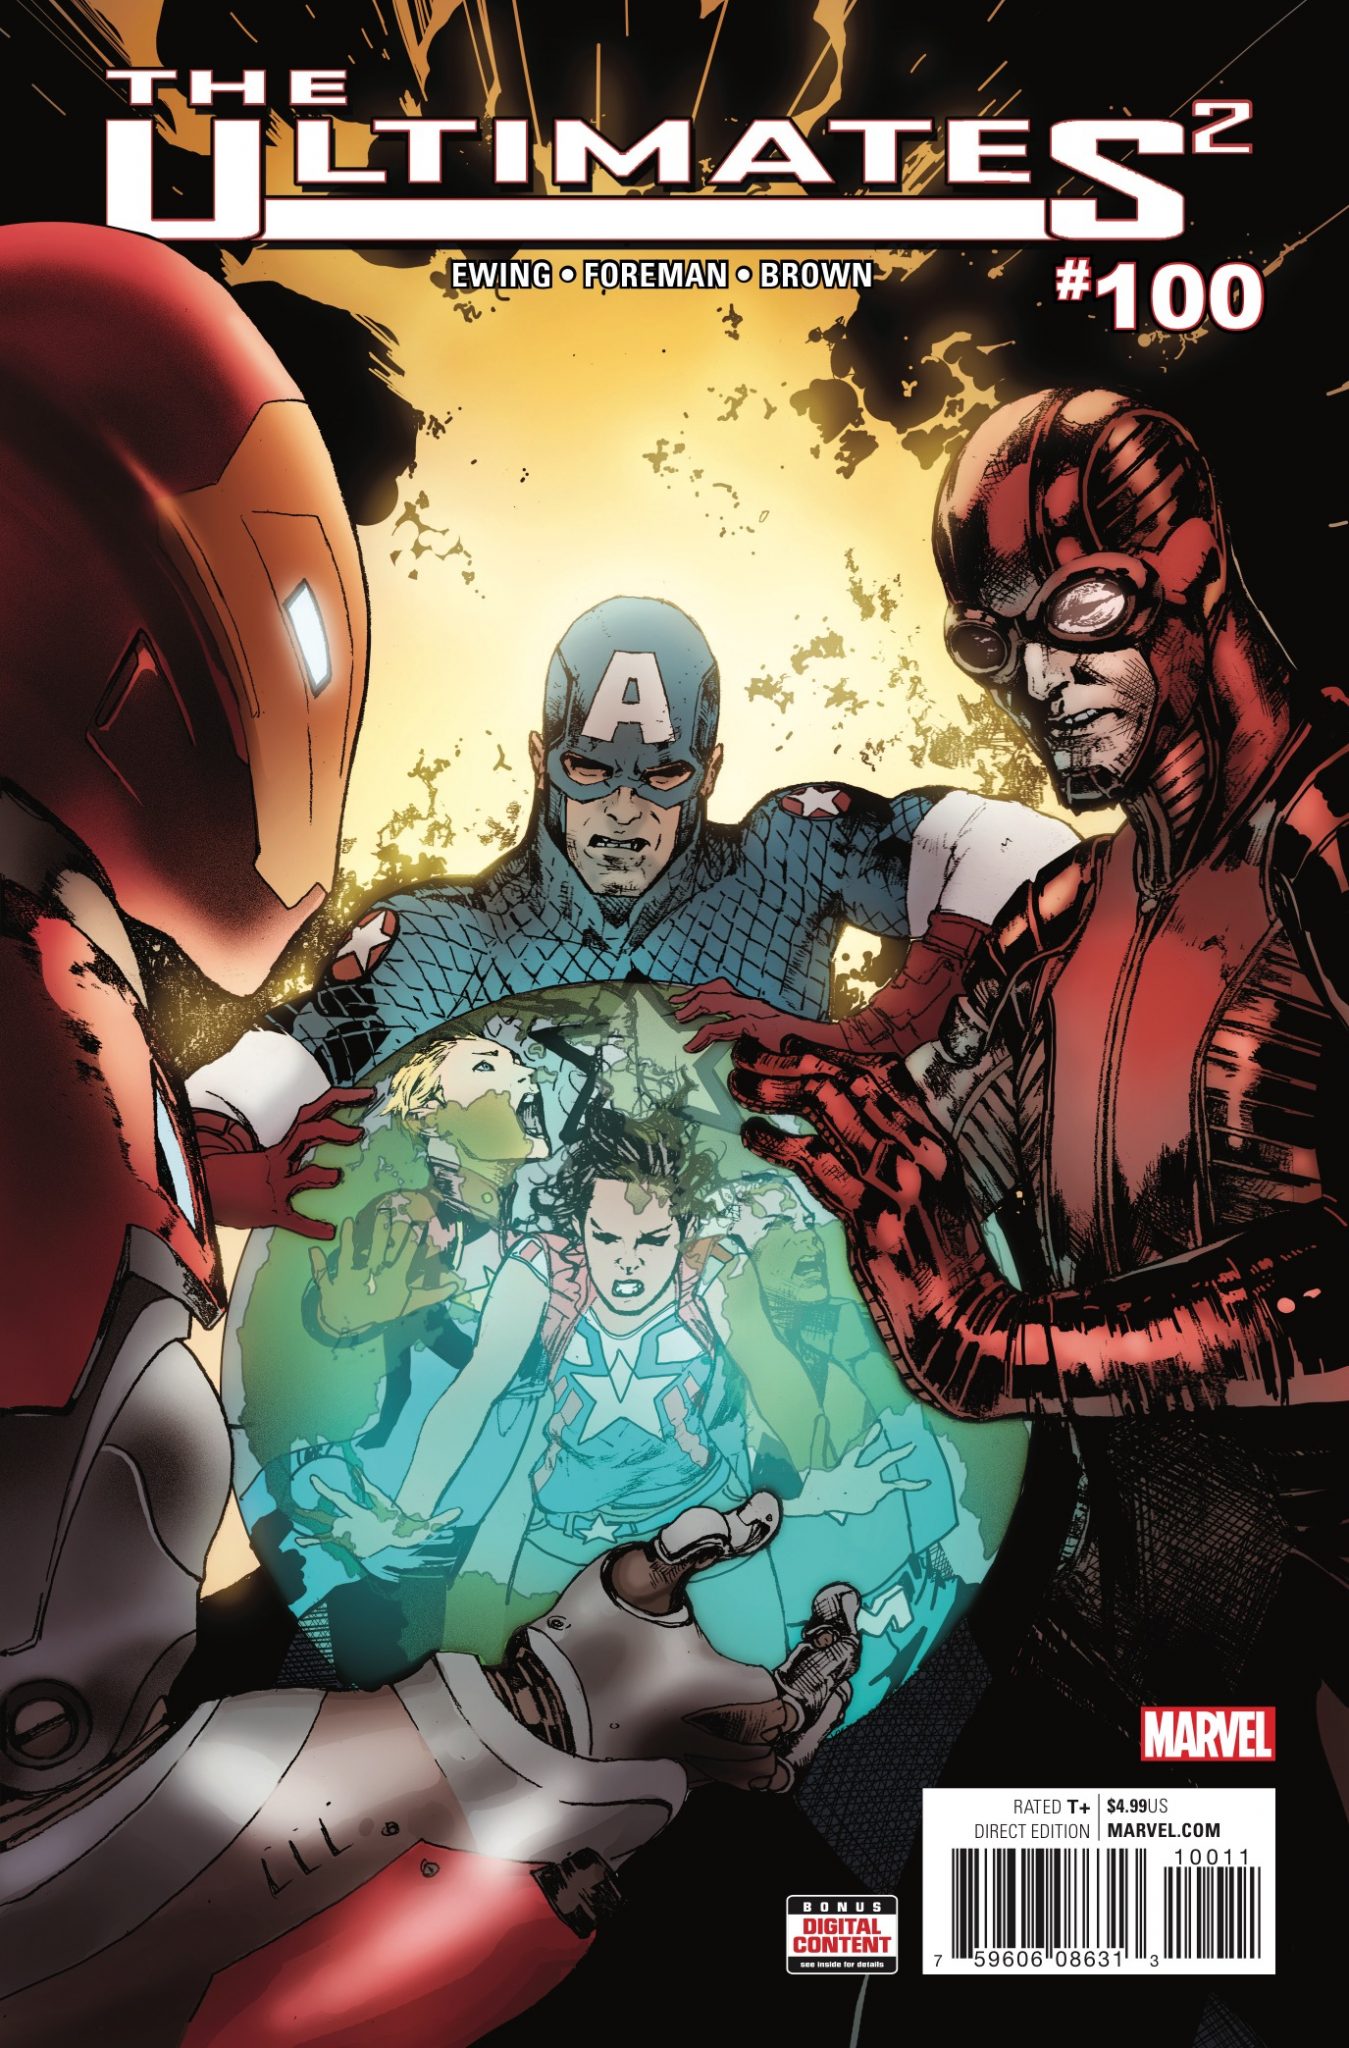 Marvel Preview: Ultimates 2 #100